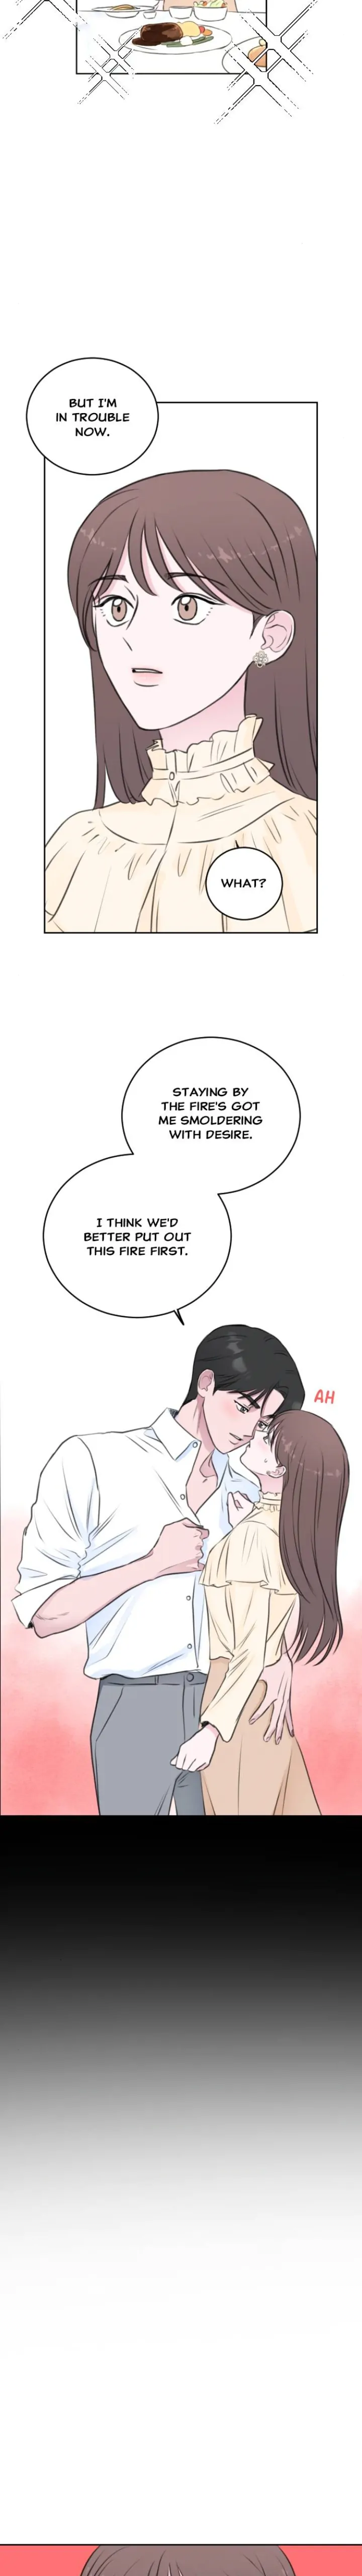 Office Marriage, After a Breakup chapter 28